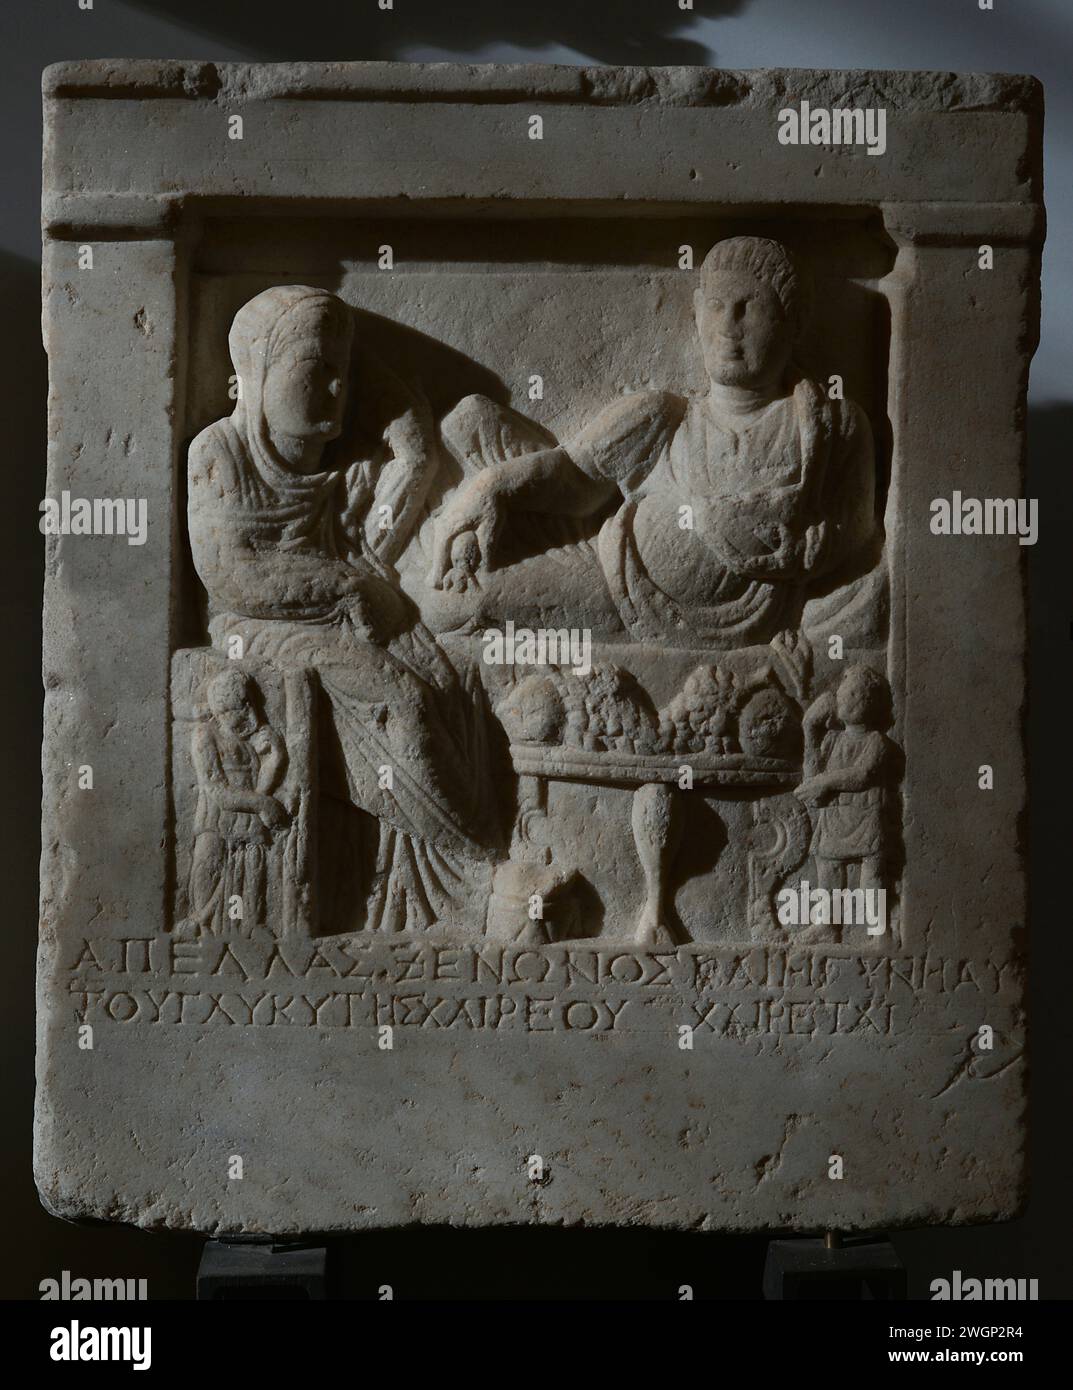 Funeral feast: a woman, a man and servants. Inscription in Greek. Stele of Apellas, son of Xenon, and his wife Glykytes, daughter of Haireos. Early Roman Empire. National Archaeological Museum. Sofia. Bulgaria. Stock Photo